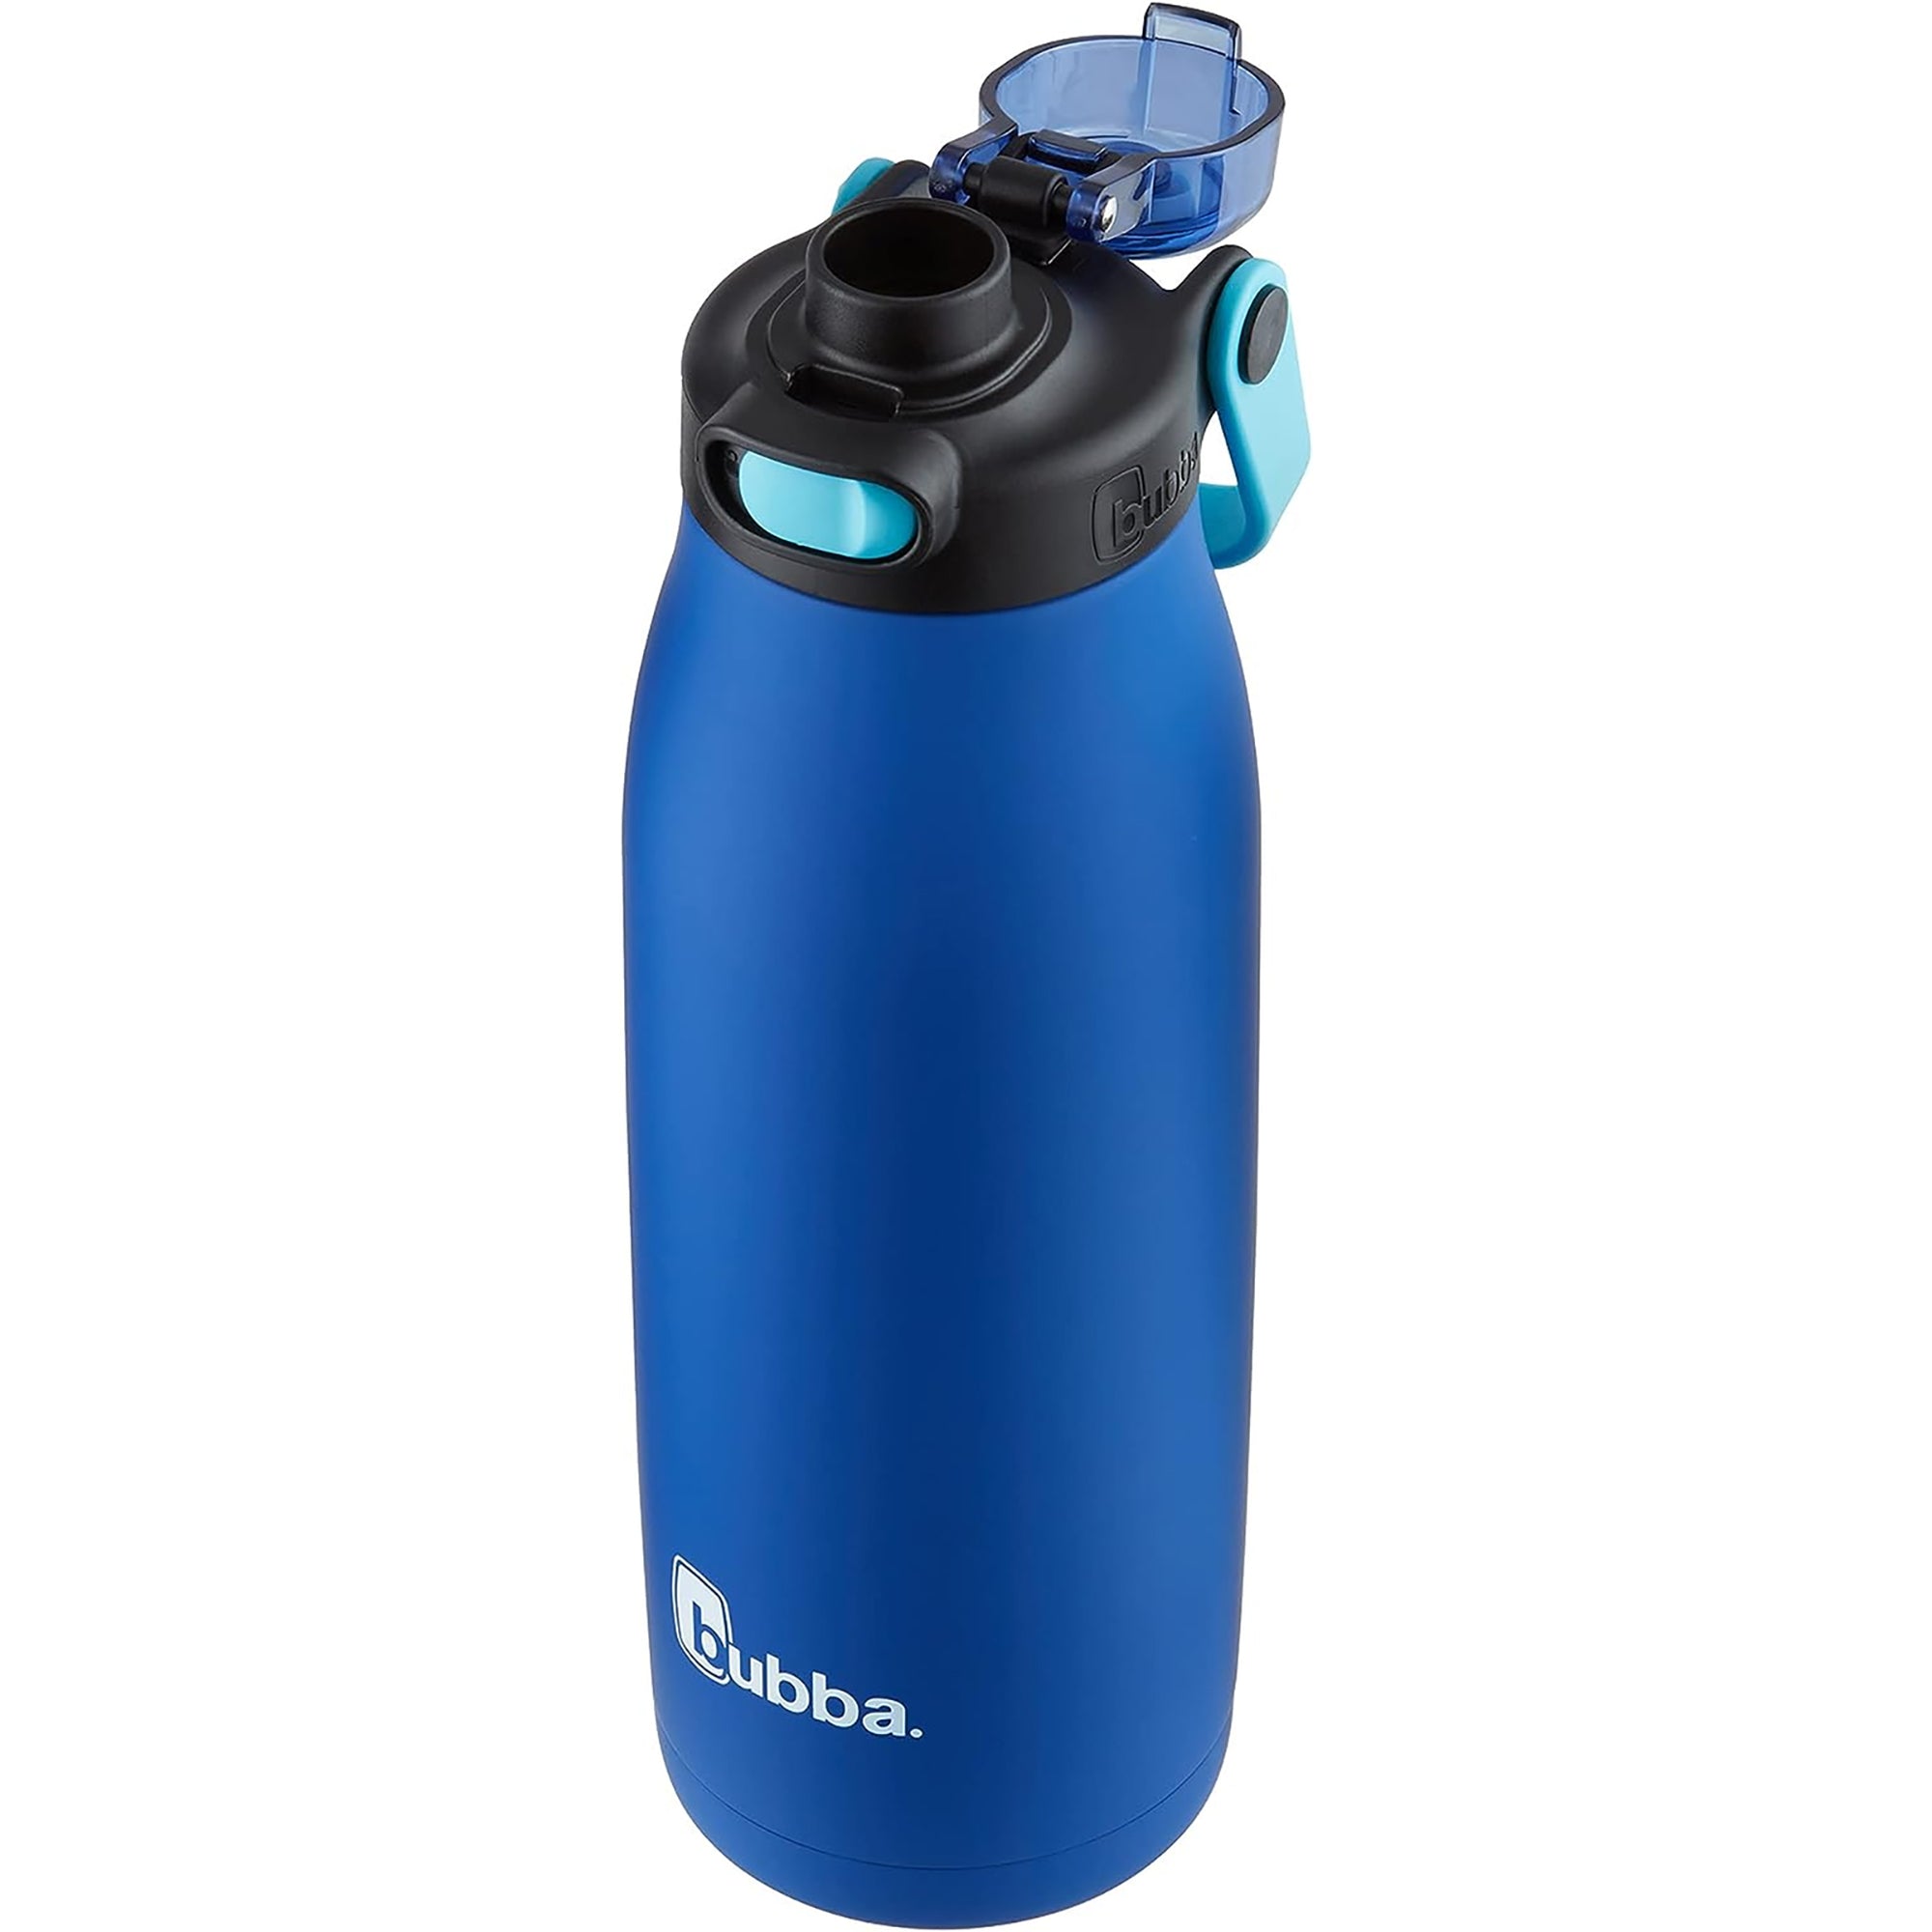 Bubba 40 oz. Radiant Vacuum Insulated Stainless Steel Rubberized Water Bottle Bubba